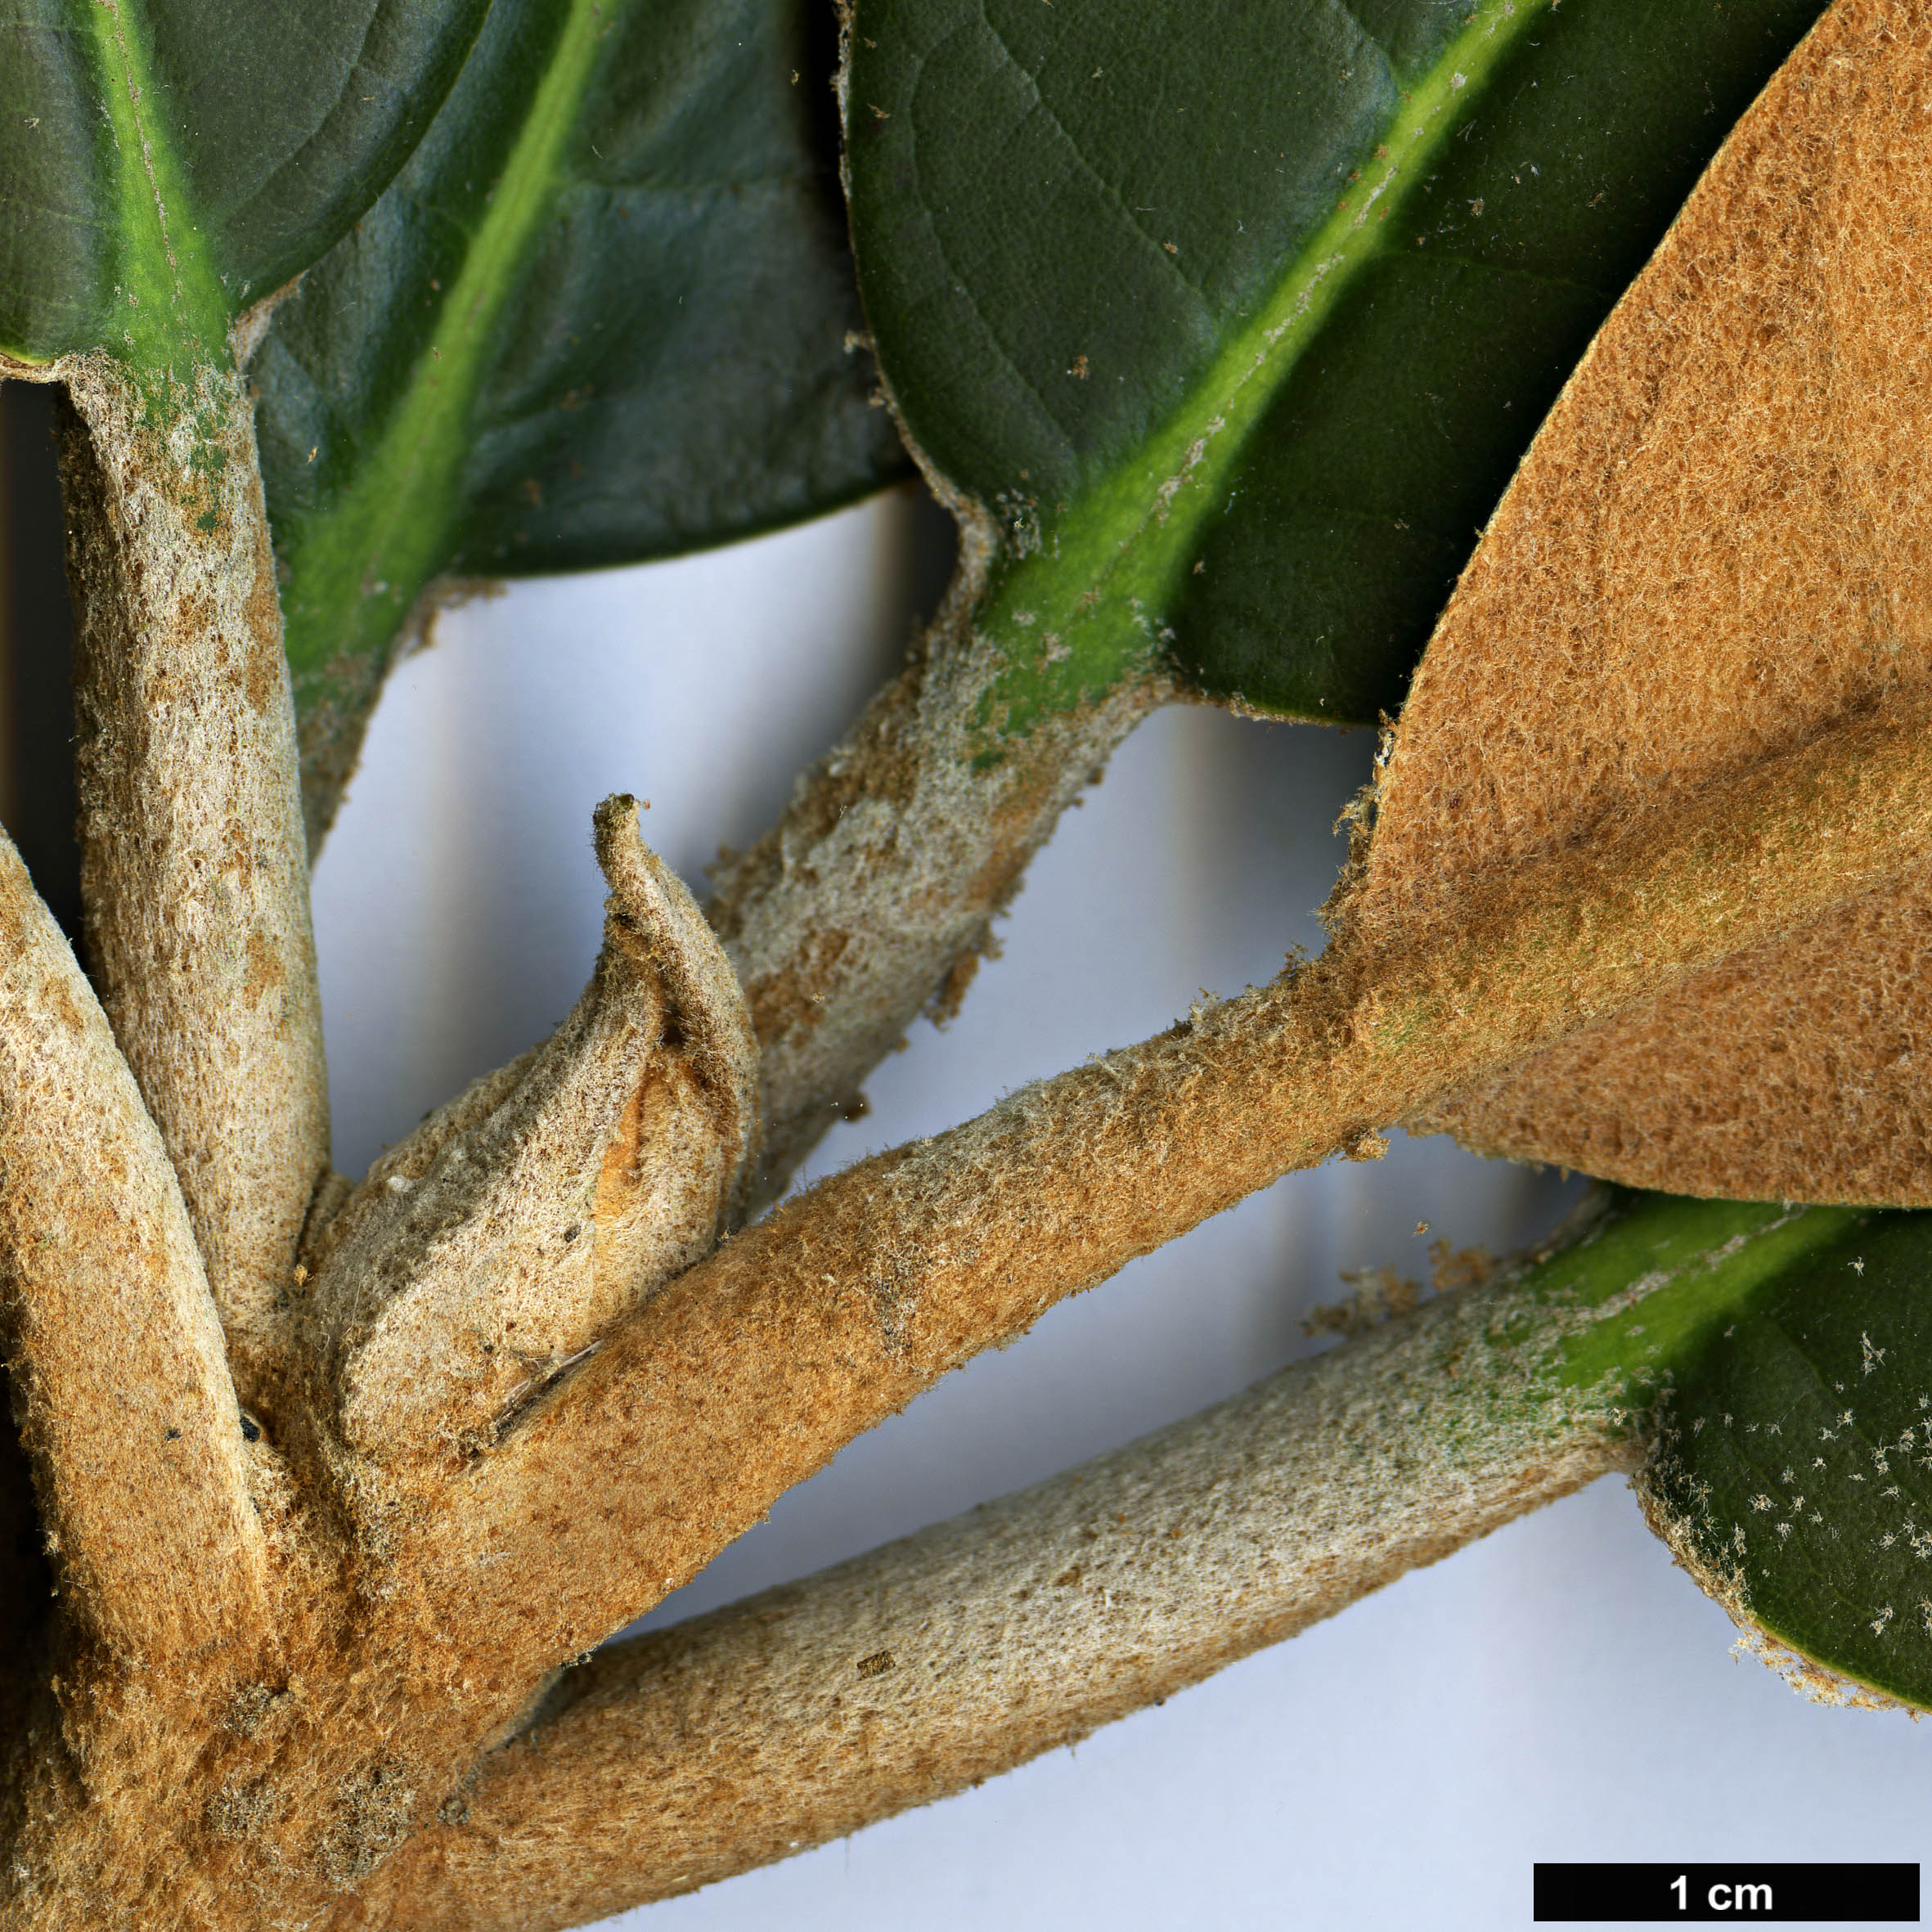 High resolution image: Family: Ericaceae - Genus: Rhododendron - Taxon: rex